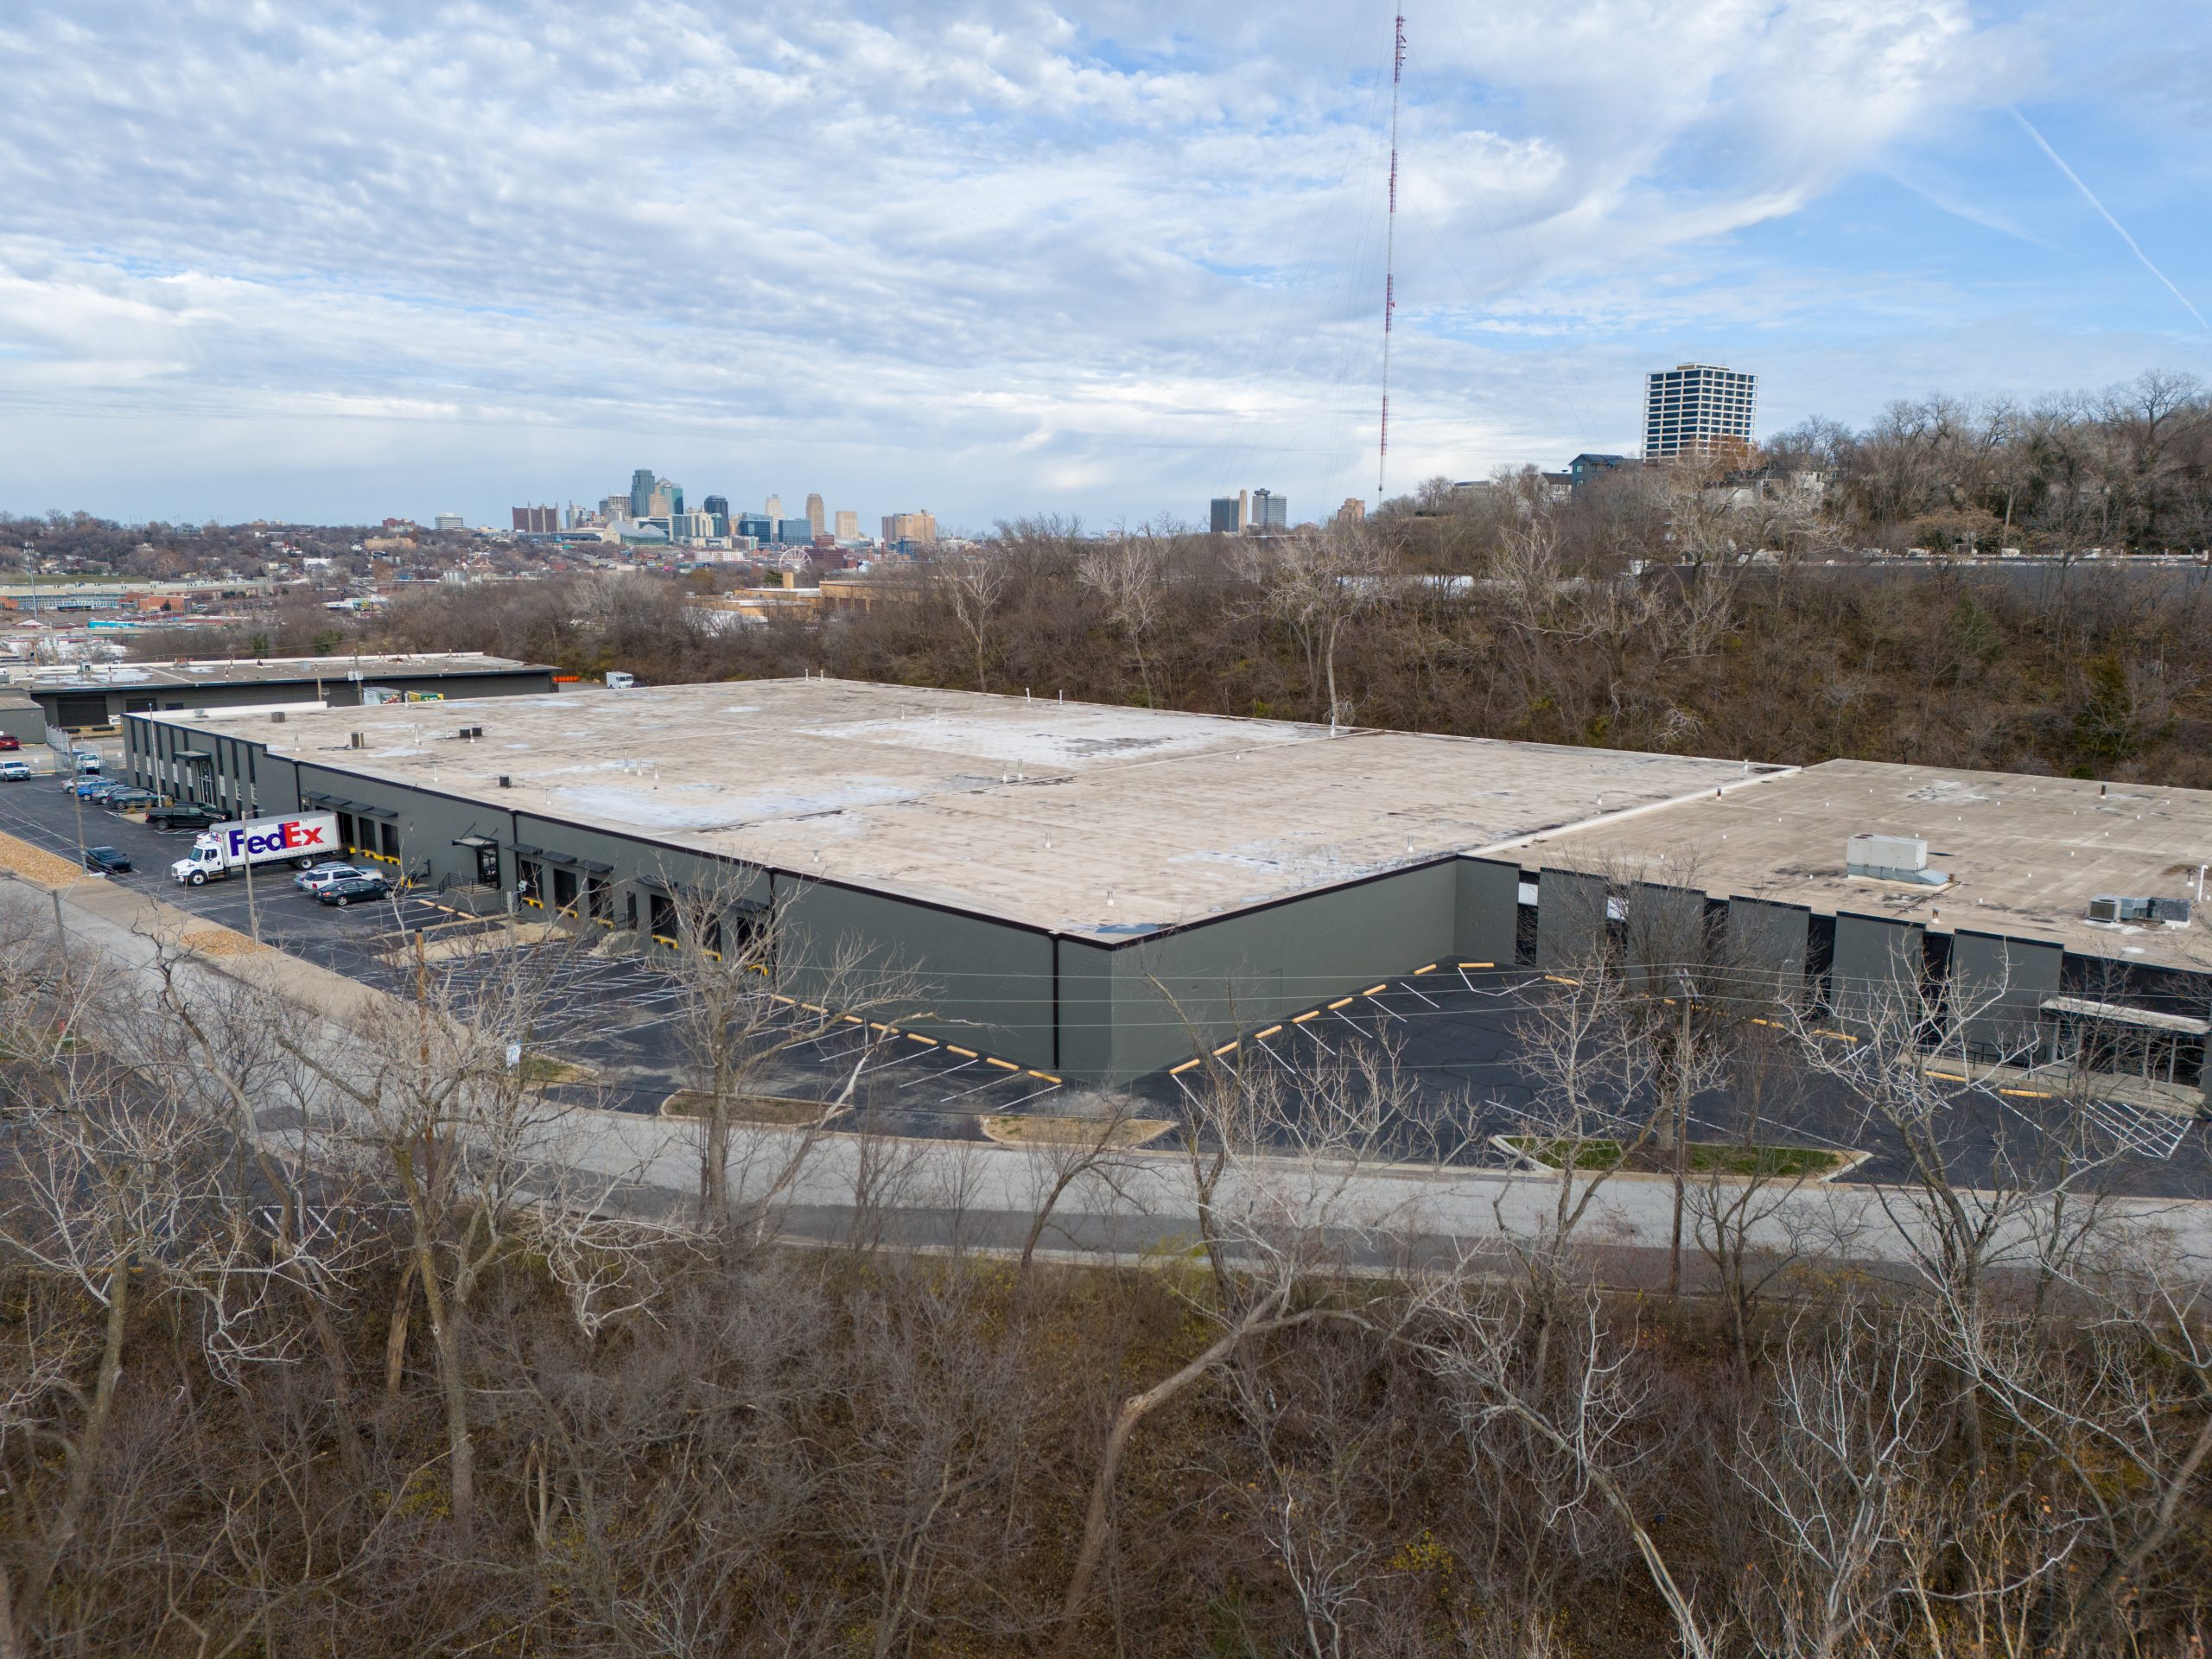 3175 Terrace - Kansas City, Missouri - Office and Industrial For Lease